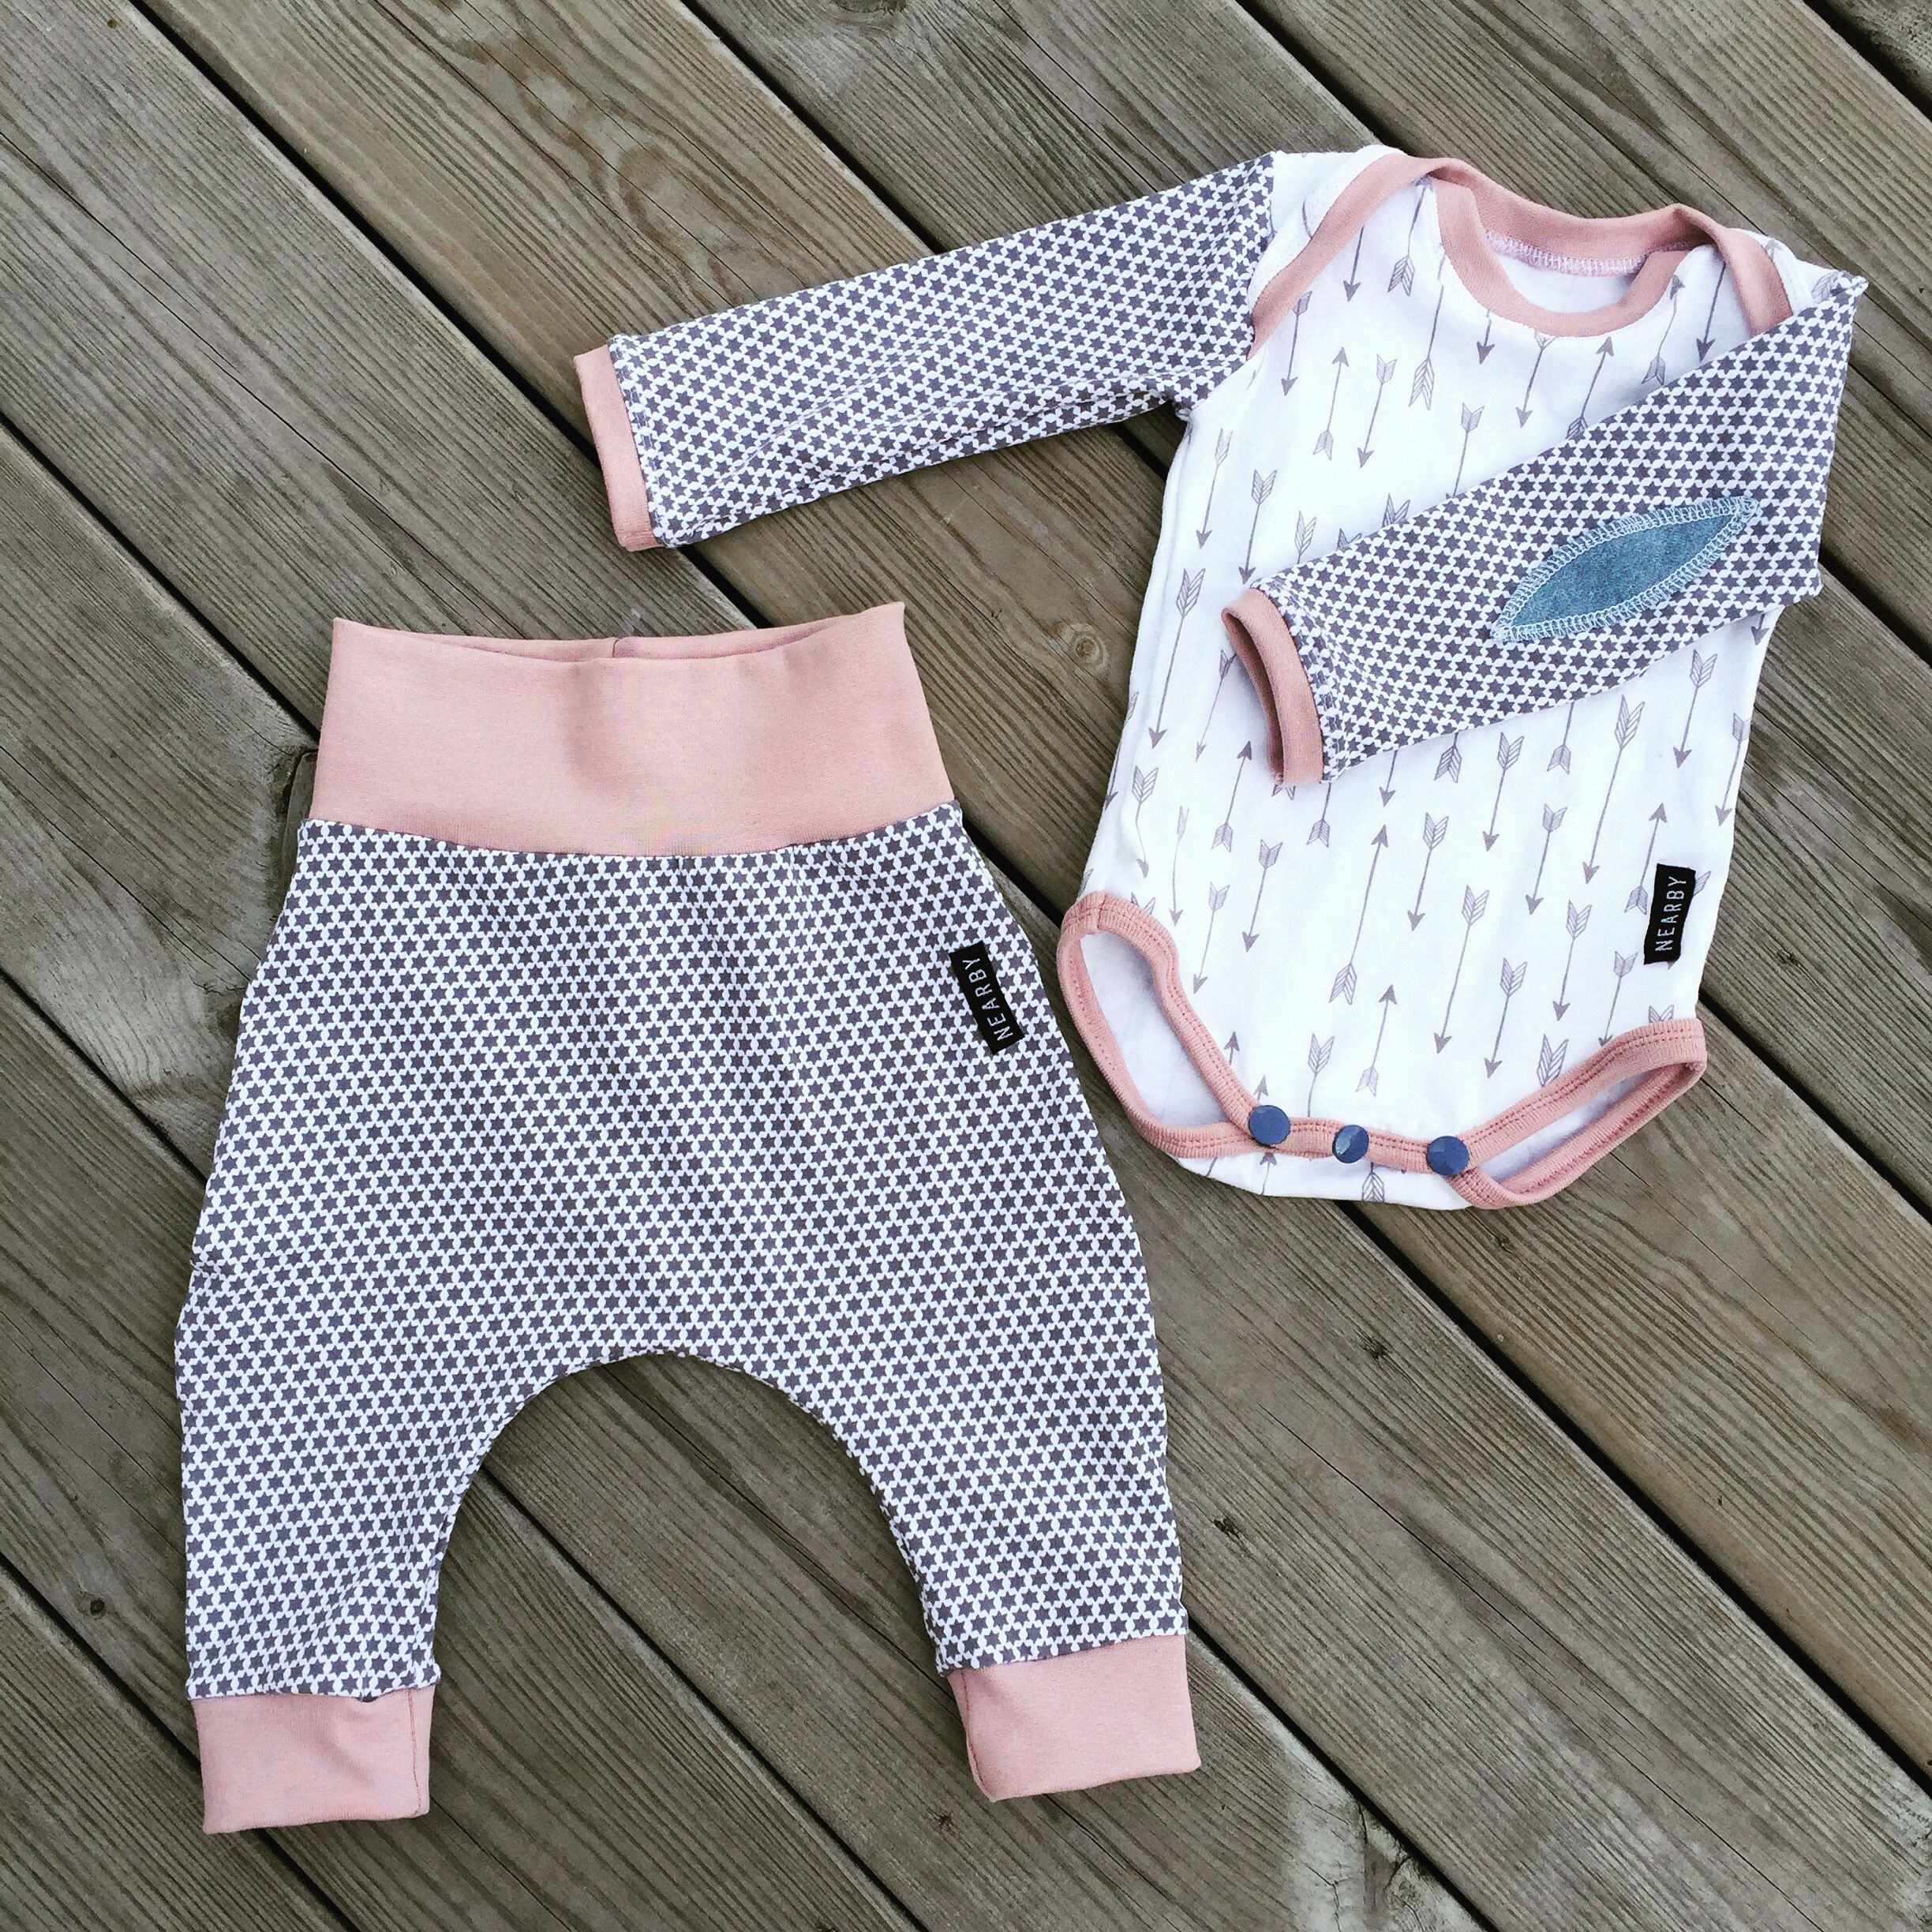 Infant Sewing Patterns Love This Free Pattern This Ba Onepiece Is So Fun To Sew You